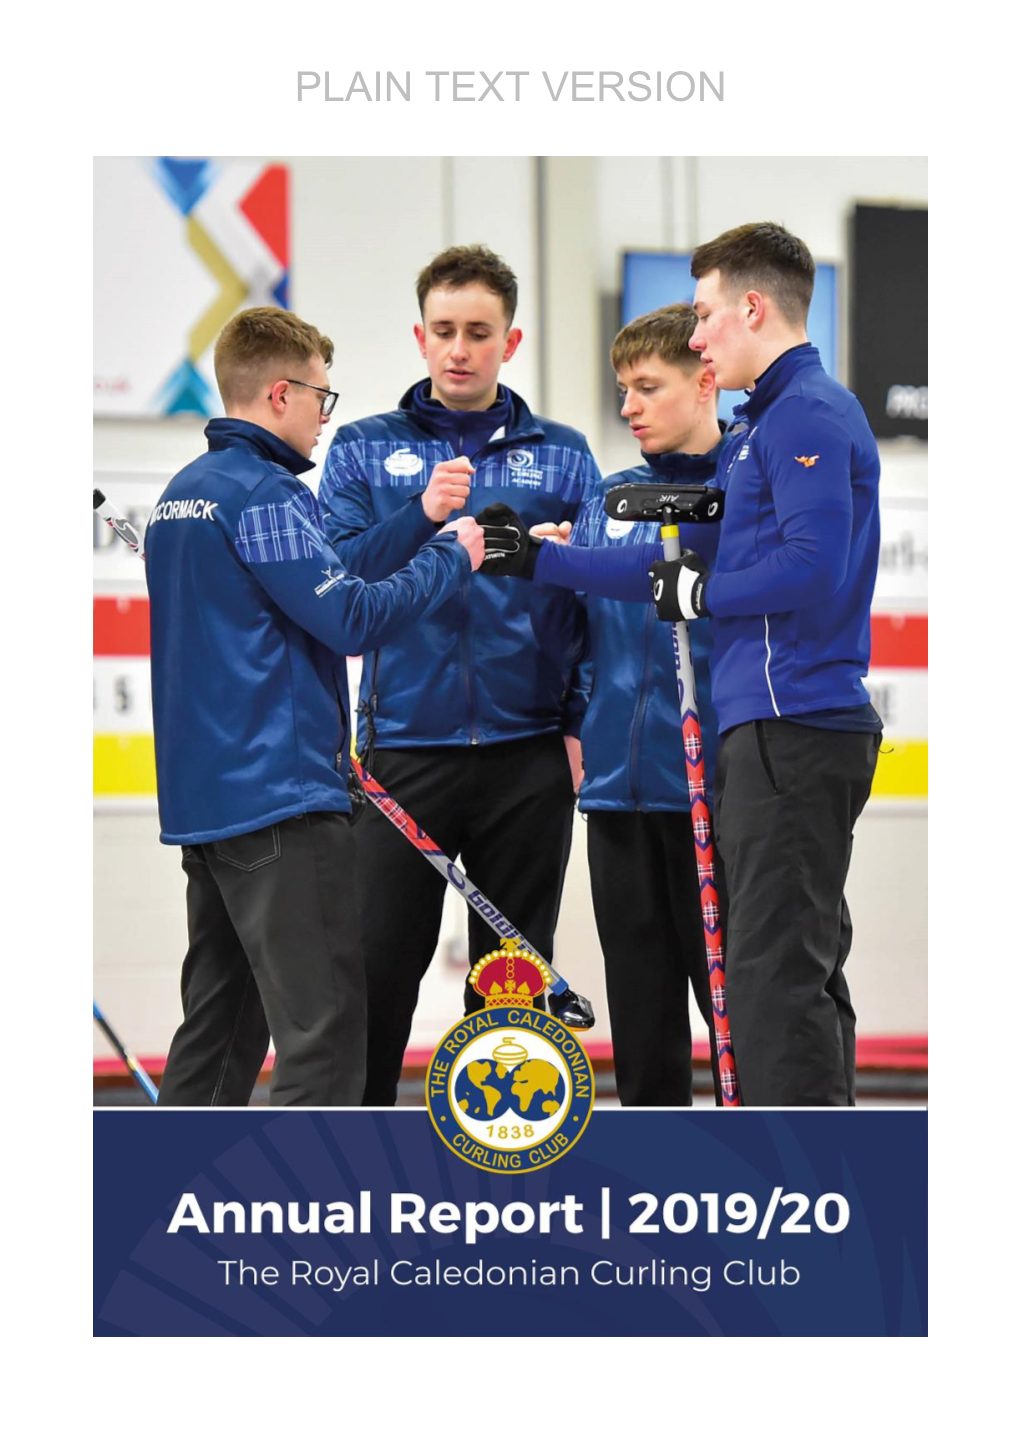 Caledonian Curling Club for 2019/20